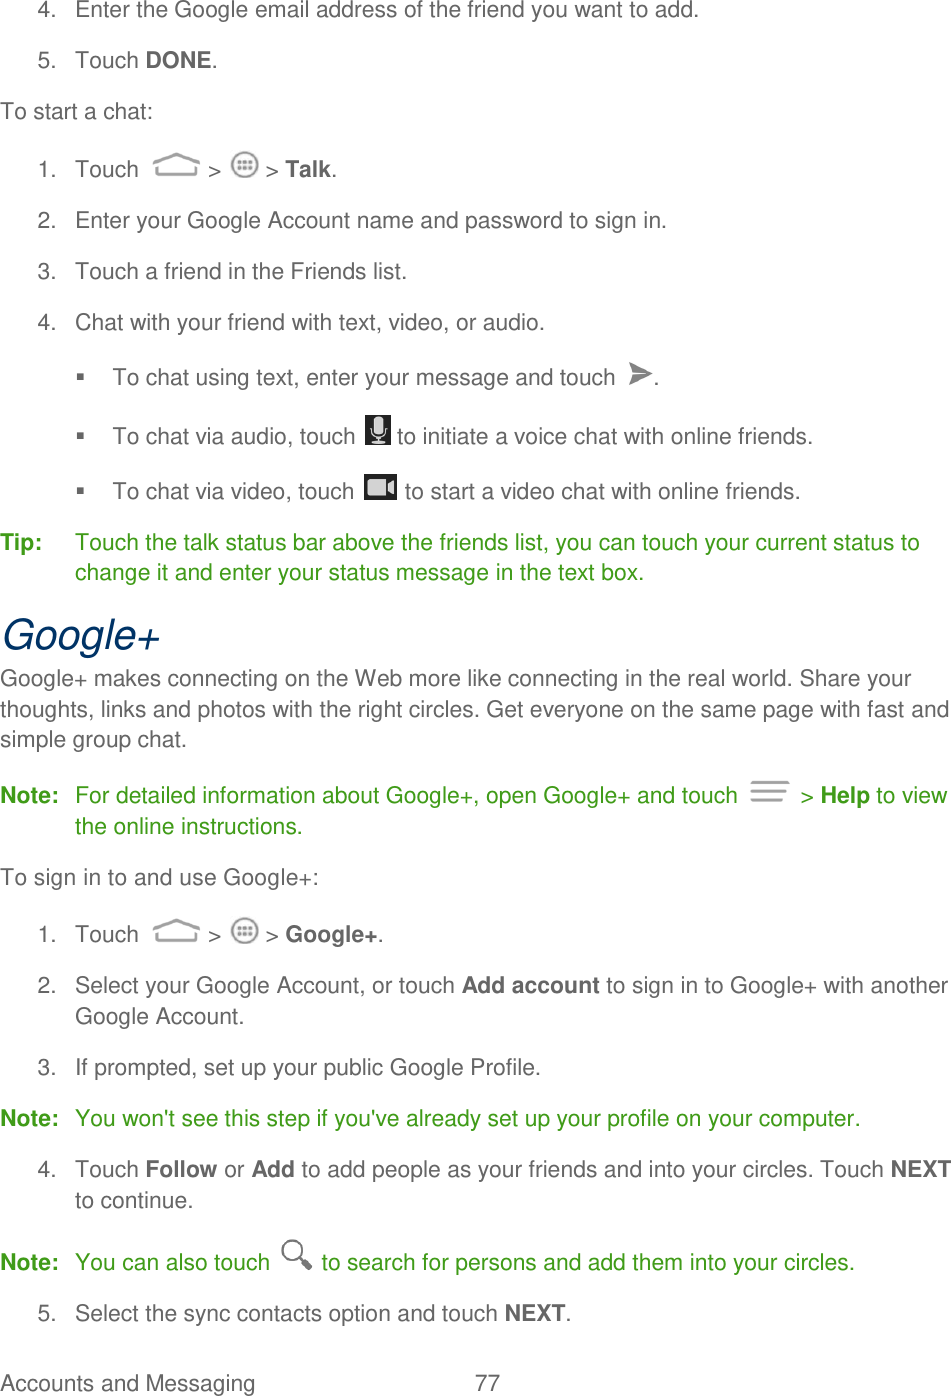 Accounts and Messaging  77   4.  Enter the Google email address of the friend you want to add.  5.  Touch DONE. To start a chat: 1.  Touch  &gt;   &gt; Talk. 2.  Enter your Google Account name and password to sign in. 3.  Touch a friend in the Friends list. 4.  Chat with your friend with text, video, or audio.   To chat using text, enter your message and touch  .   To chat via audio, touch   to initiate a voice chat with online friends.   To chat via video, touch   to start a video chat with online friends. Tip:  Touch the talk status bar above the friends list, you can touch your current status to change it and enter your status message in the text box. Google+ Google+ makes connecting on the Web more like connecting in the real world. Share your thoughts, links and photos with the right circles. Get everyone on the same page with fast and simple group chat. Note:  For detailed information about Google+, open Google+ and touch   &gt; Help to view the online instructions. To sign in to and use Google+: 1.  Touch   &gt;   &gt; Google+. 2.  Select your Google Account, or touch Add account to sign in to Google+ with another Google Account.  3.  If prompted, set up your public Google Profile.  Note:  You won&apos;t see this step if you&apos;ve already set up your profile on your computer. 4.  Touch Follow or Add to add people as your friends and into your circles. Touch NEXT to continue. Note:  You can also touch   to search for persons and add them into your circles. 5.  Select the sync contacts option and touch NEXT. 